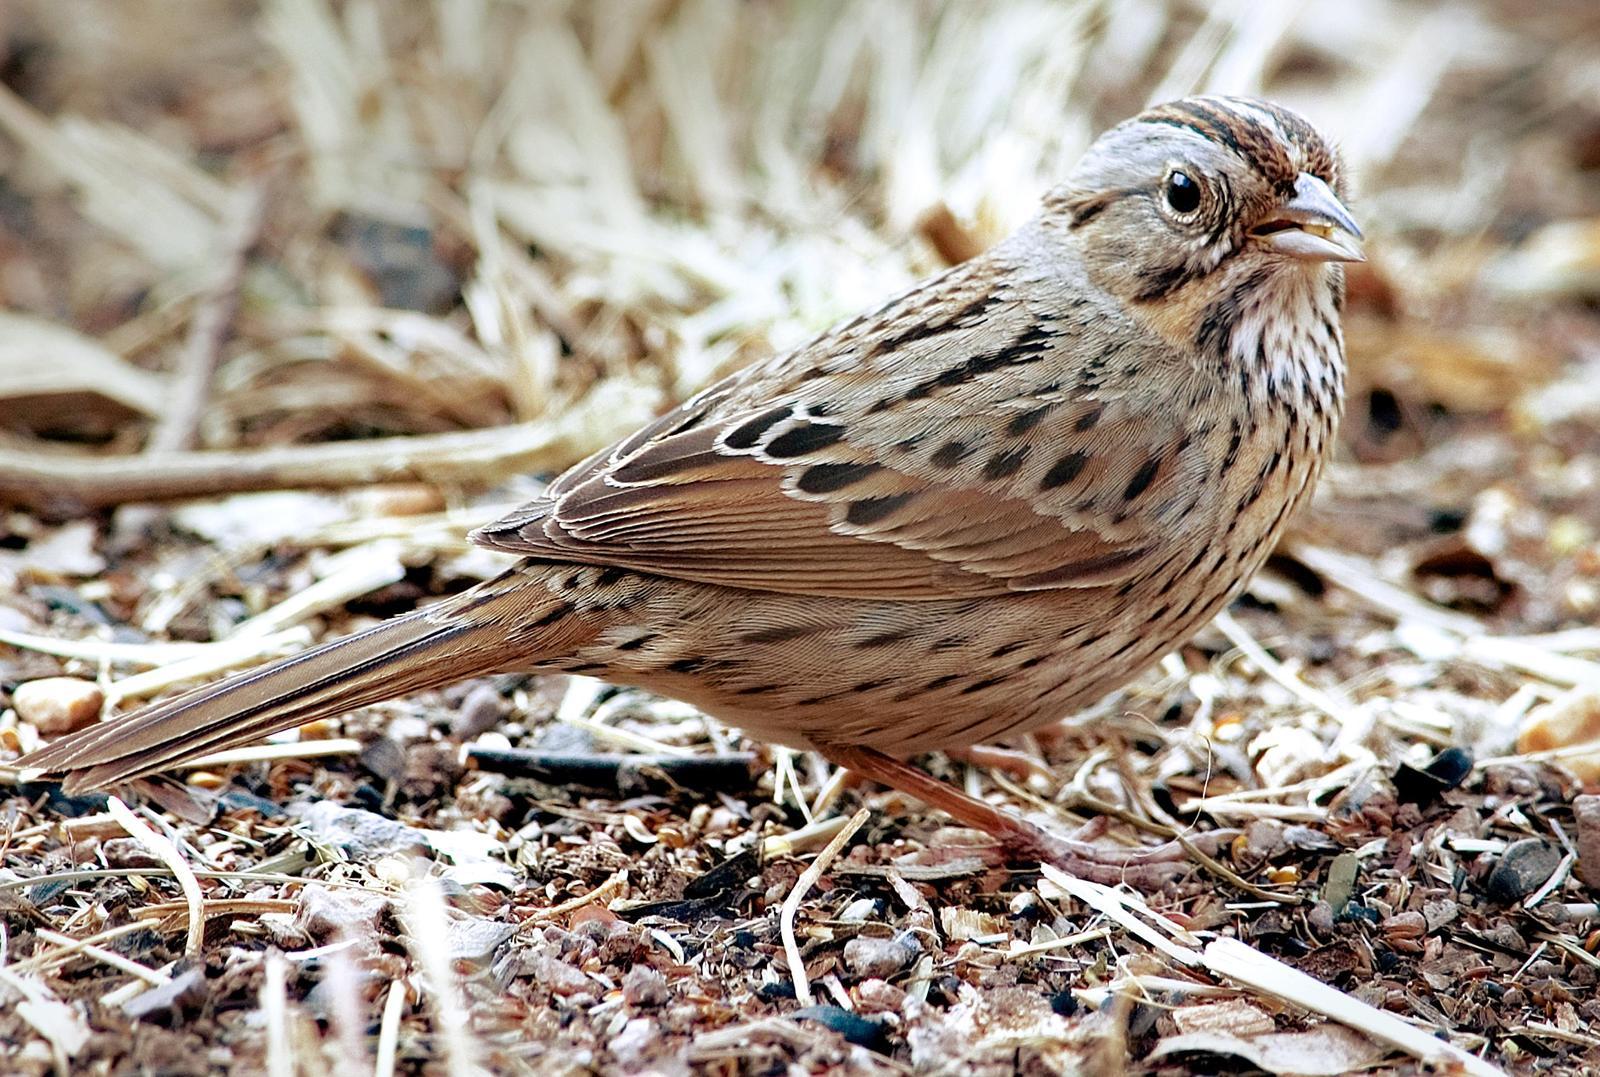 Lincoln's Sparrow Photo by Mason Rose